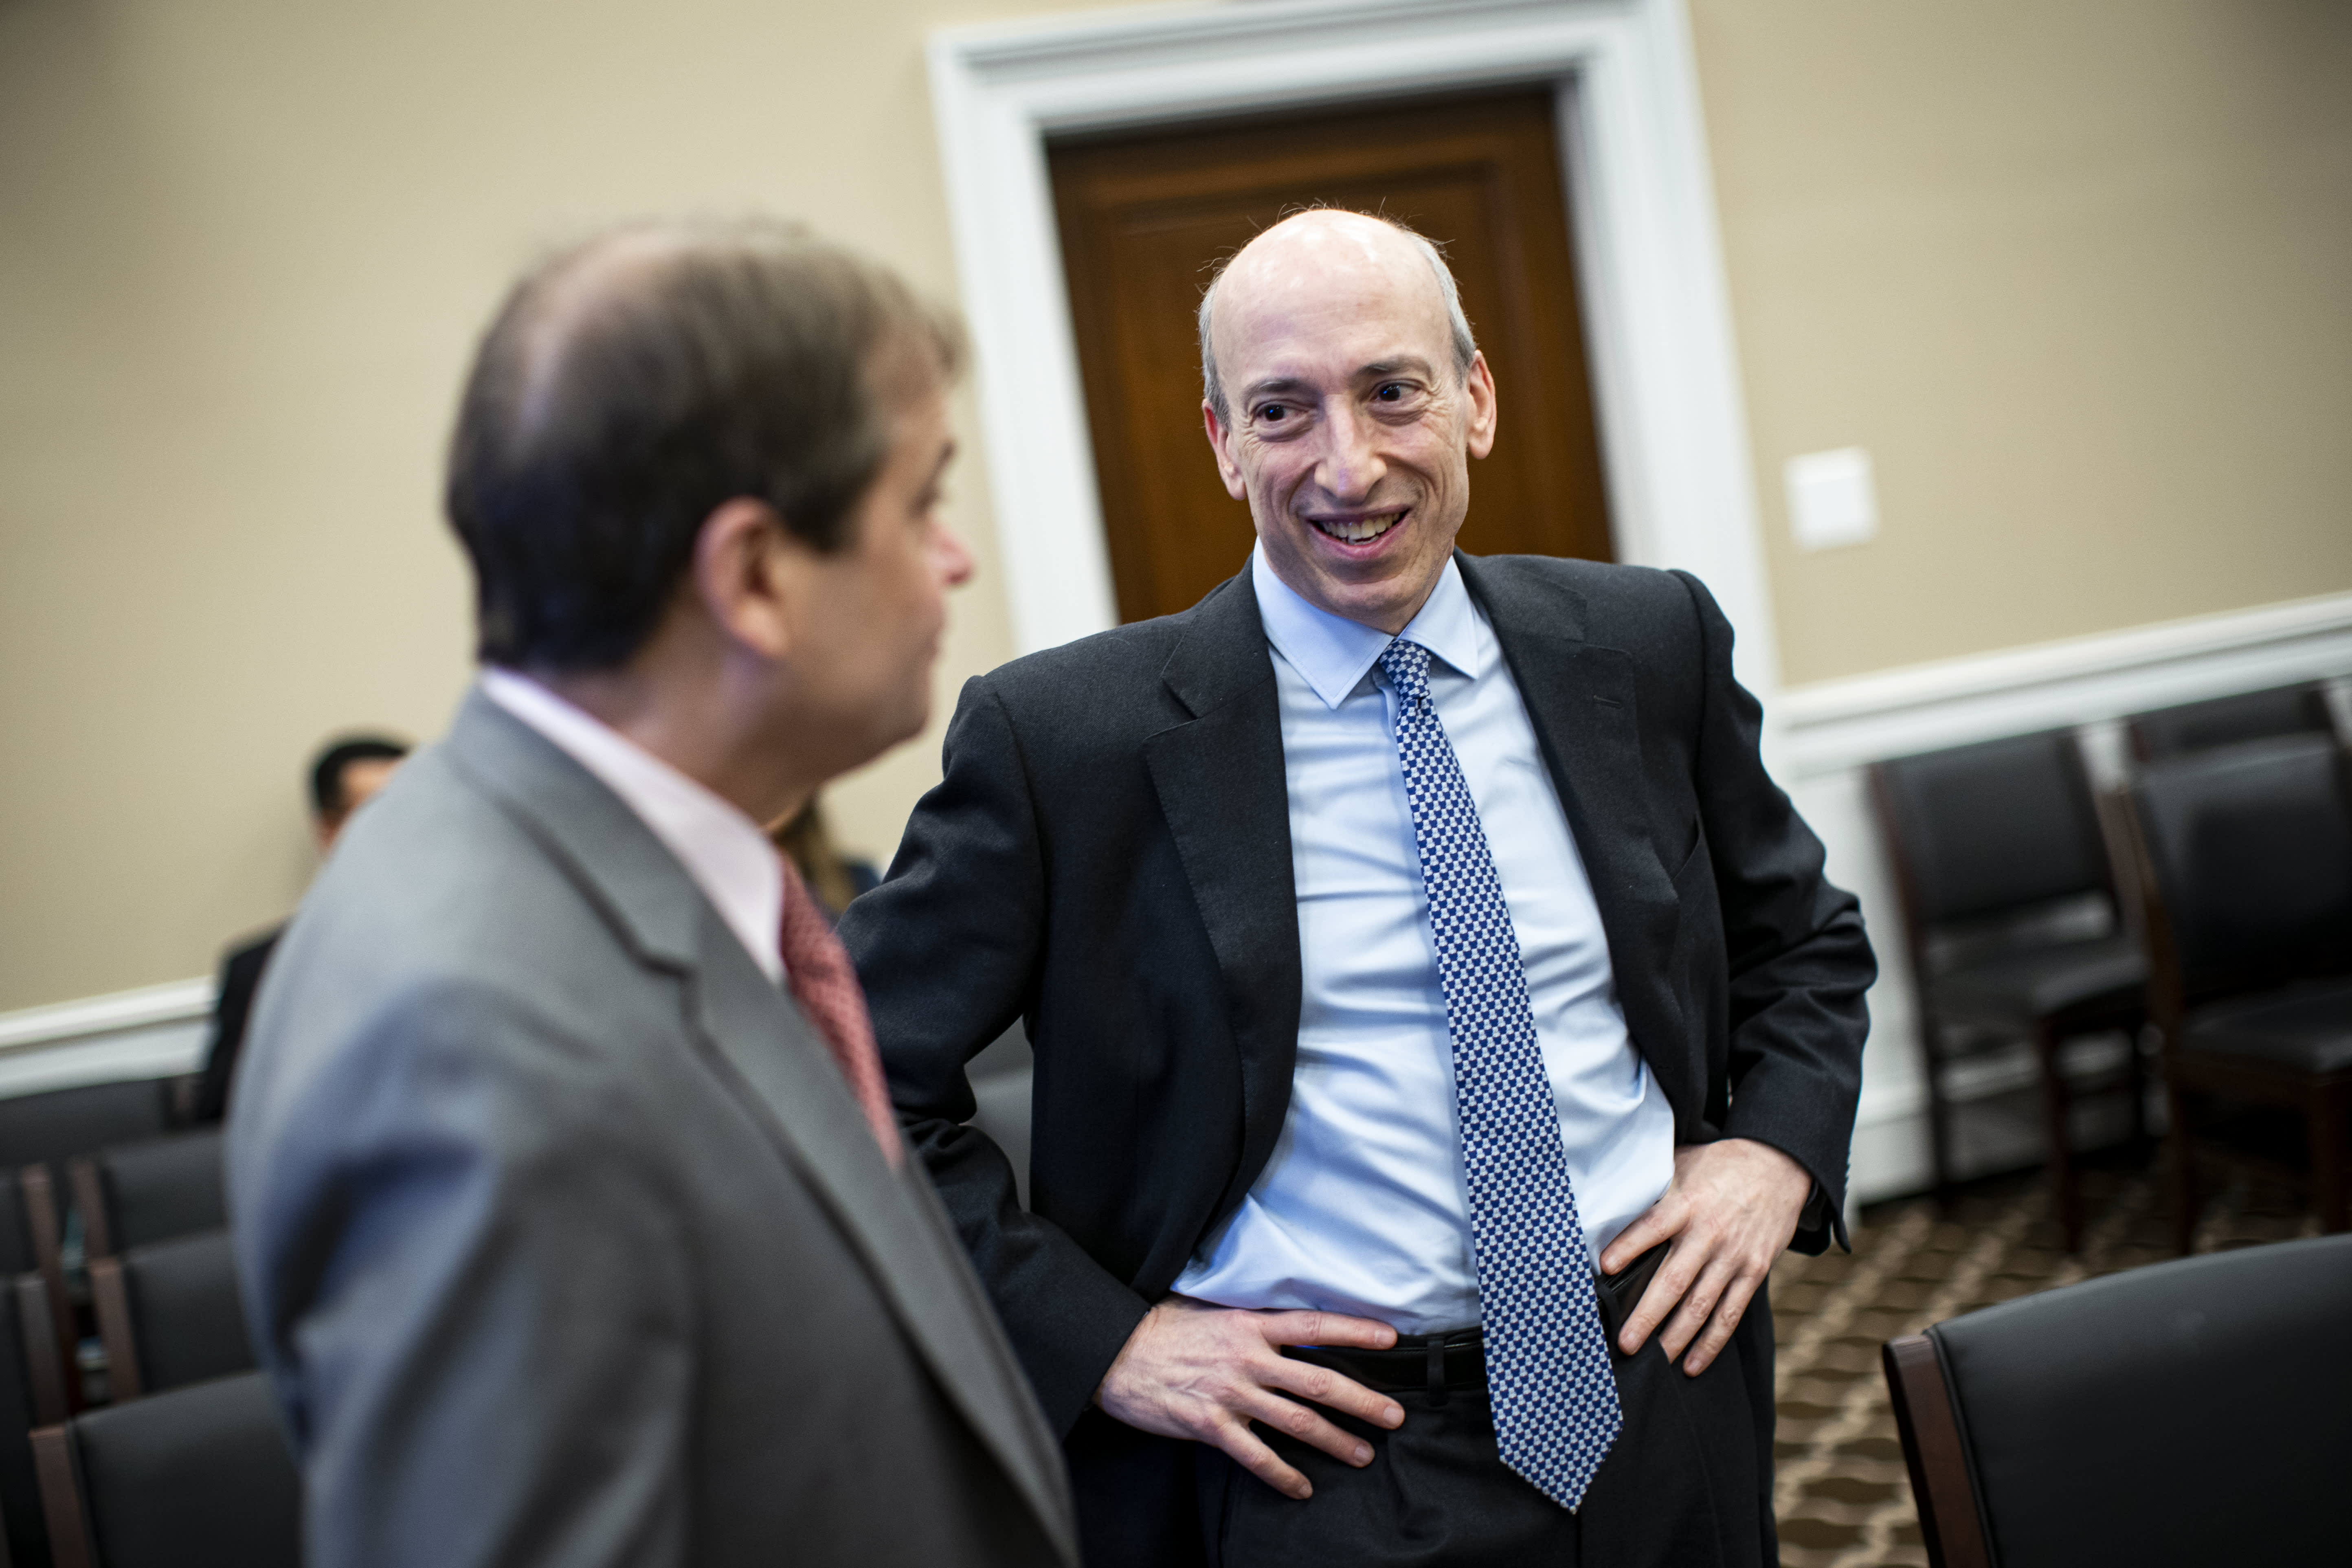 SEC Chair Gary Gensler tees up changes to how the stock market operates